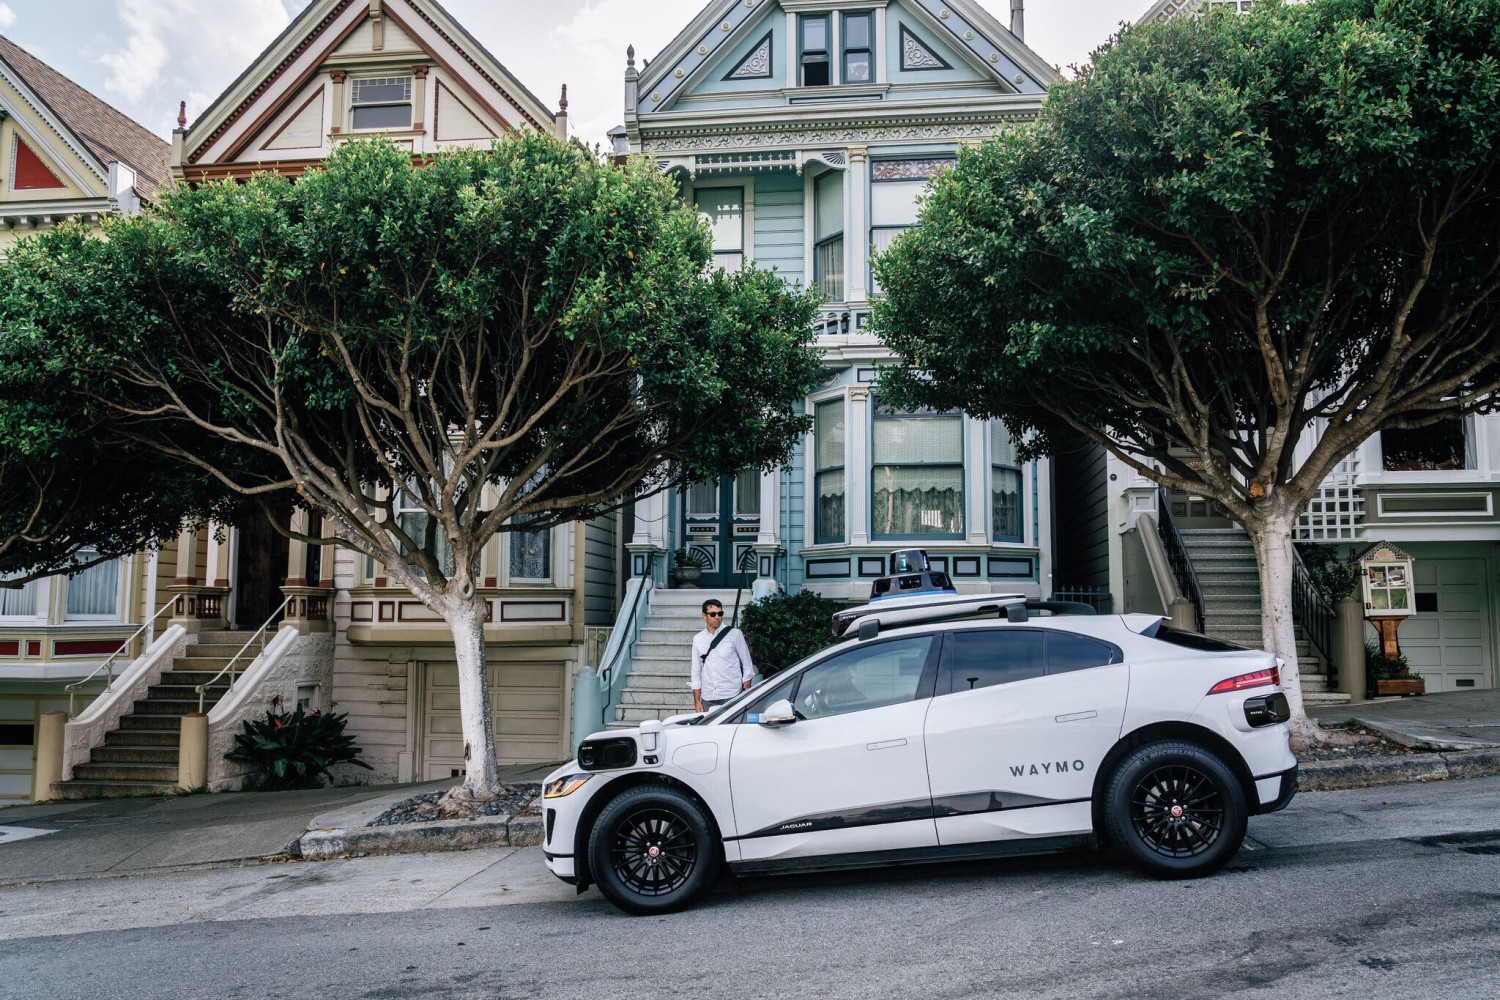 A Waymo driverless car arriving in front of the Painted Ladies on Monday.Credit...Andri Tambunan for The New York Times